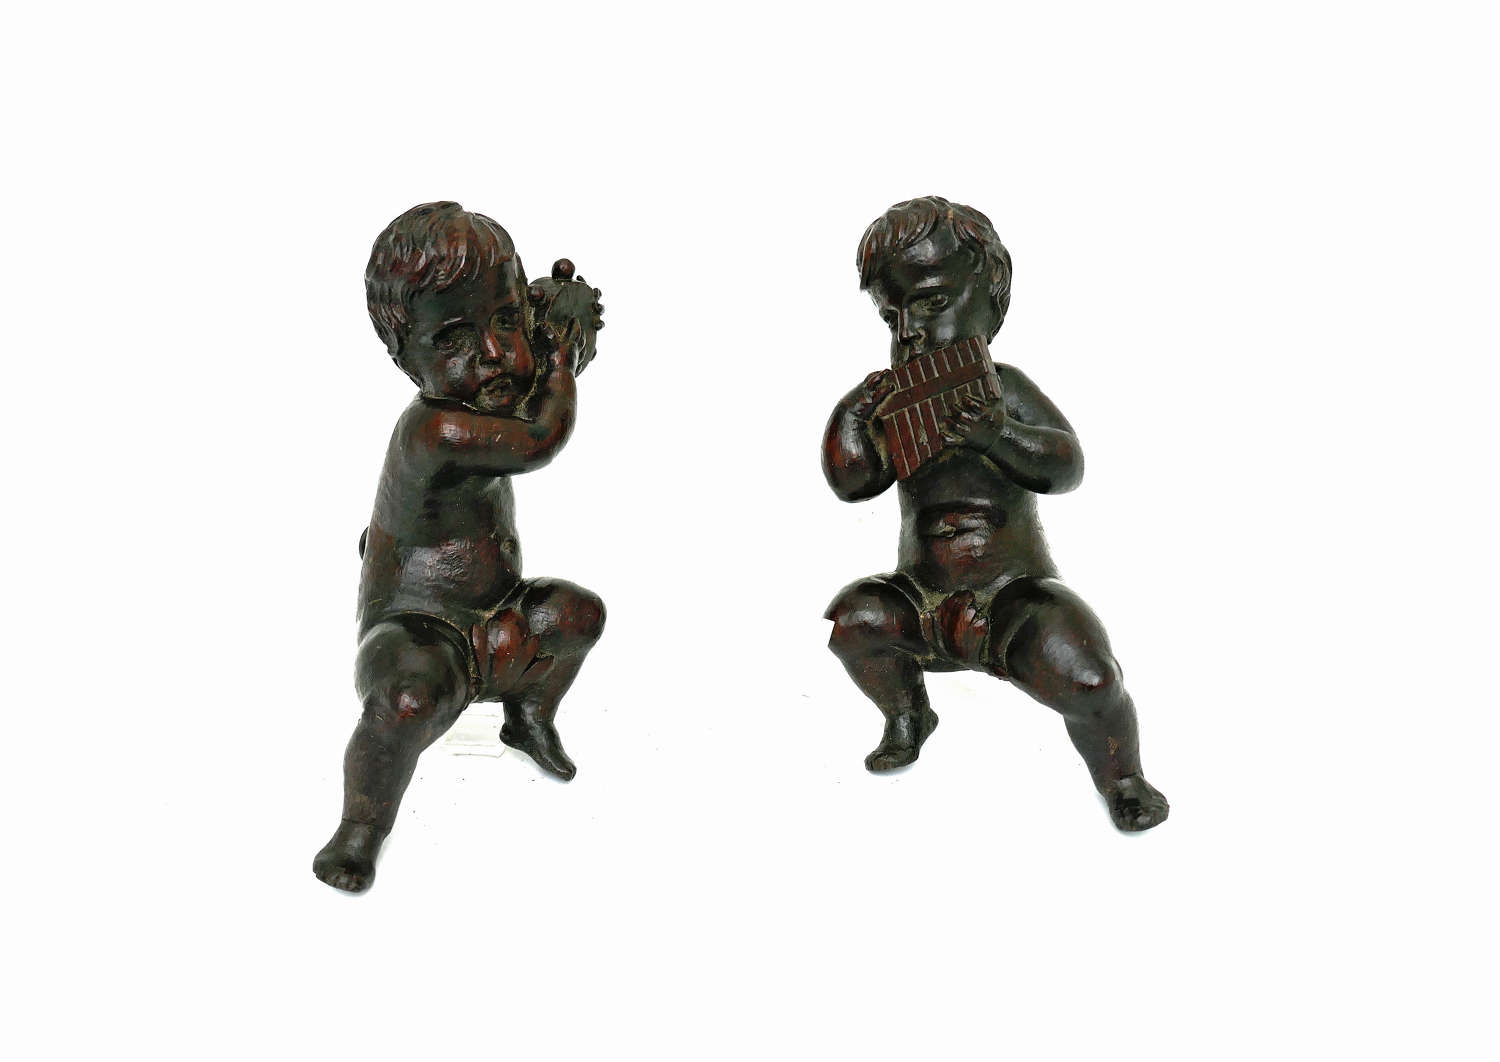 Antique Carvings 18thc Walnut Cherubs Playing Musical Instruments.